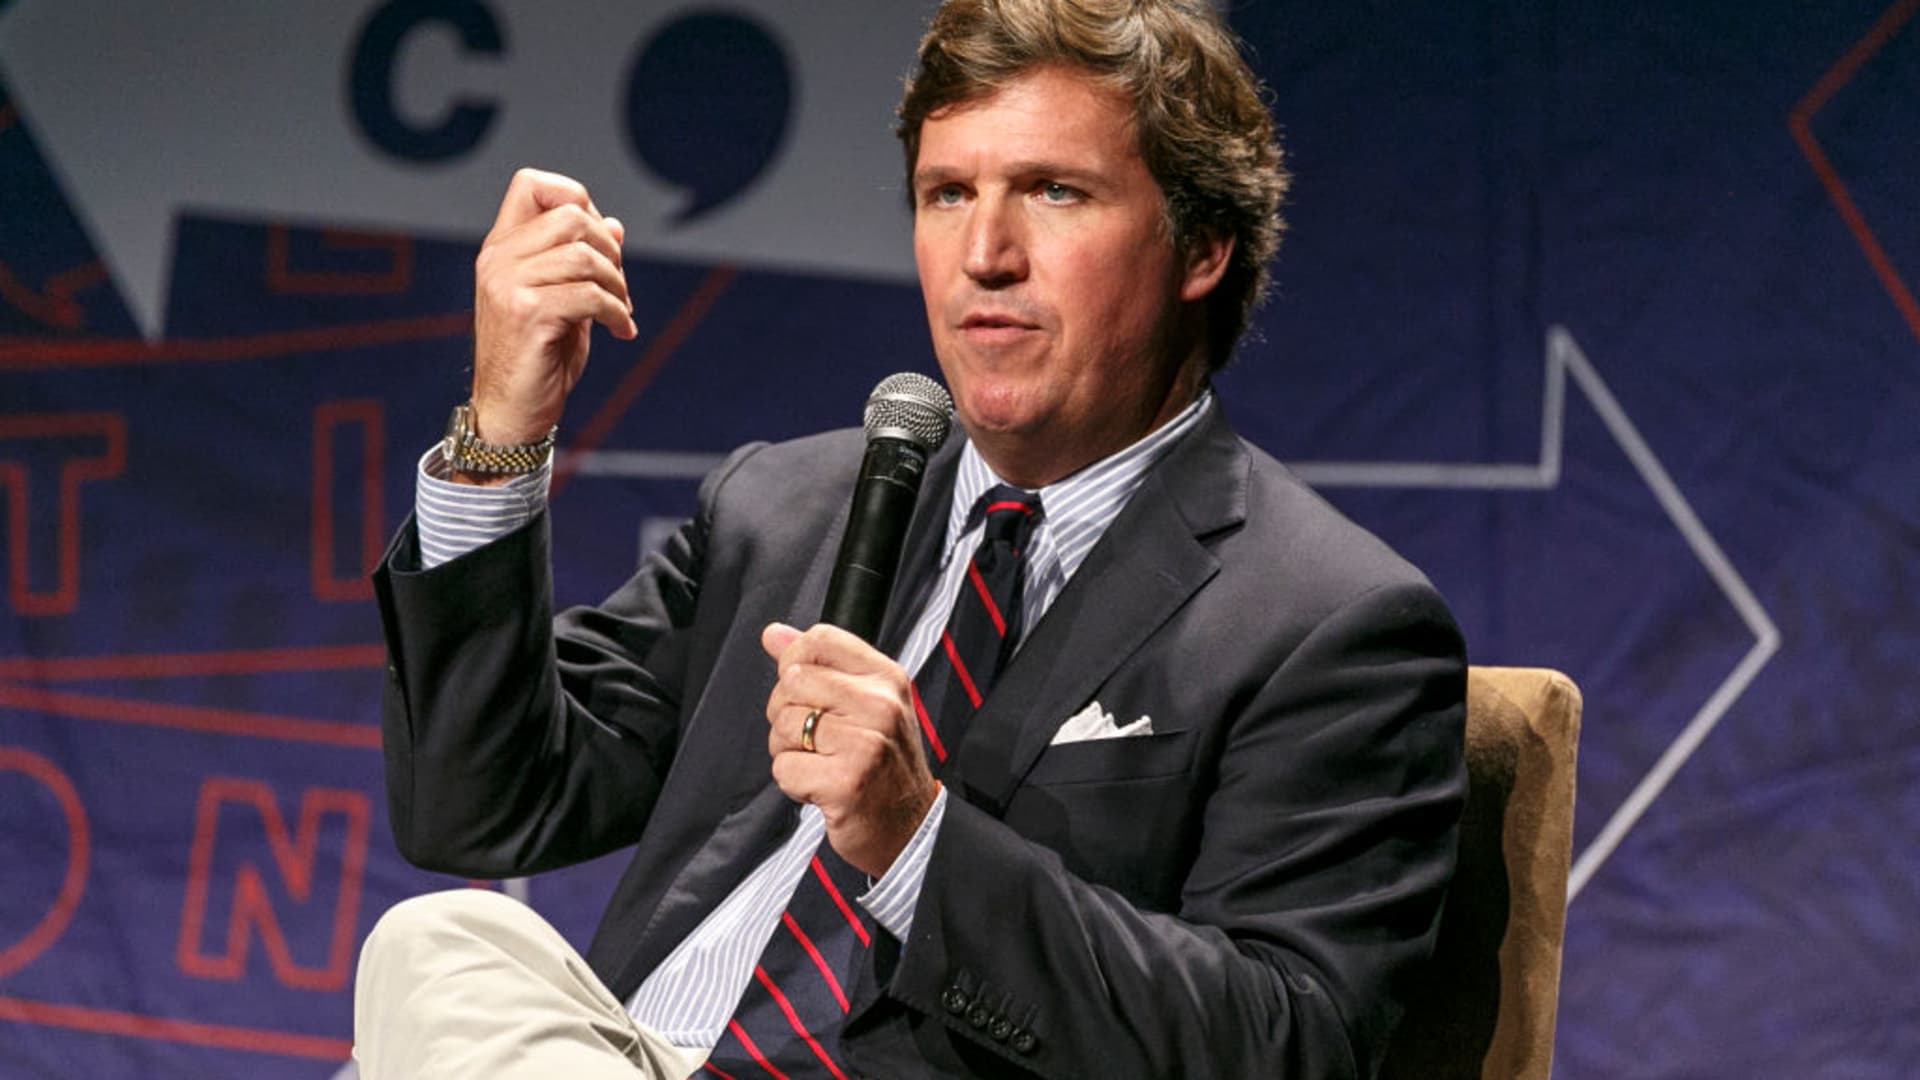 Tucker Carlson breaks his silence without addressing why Fox News fired him